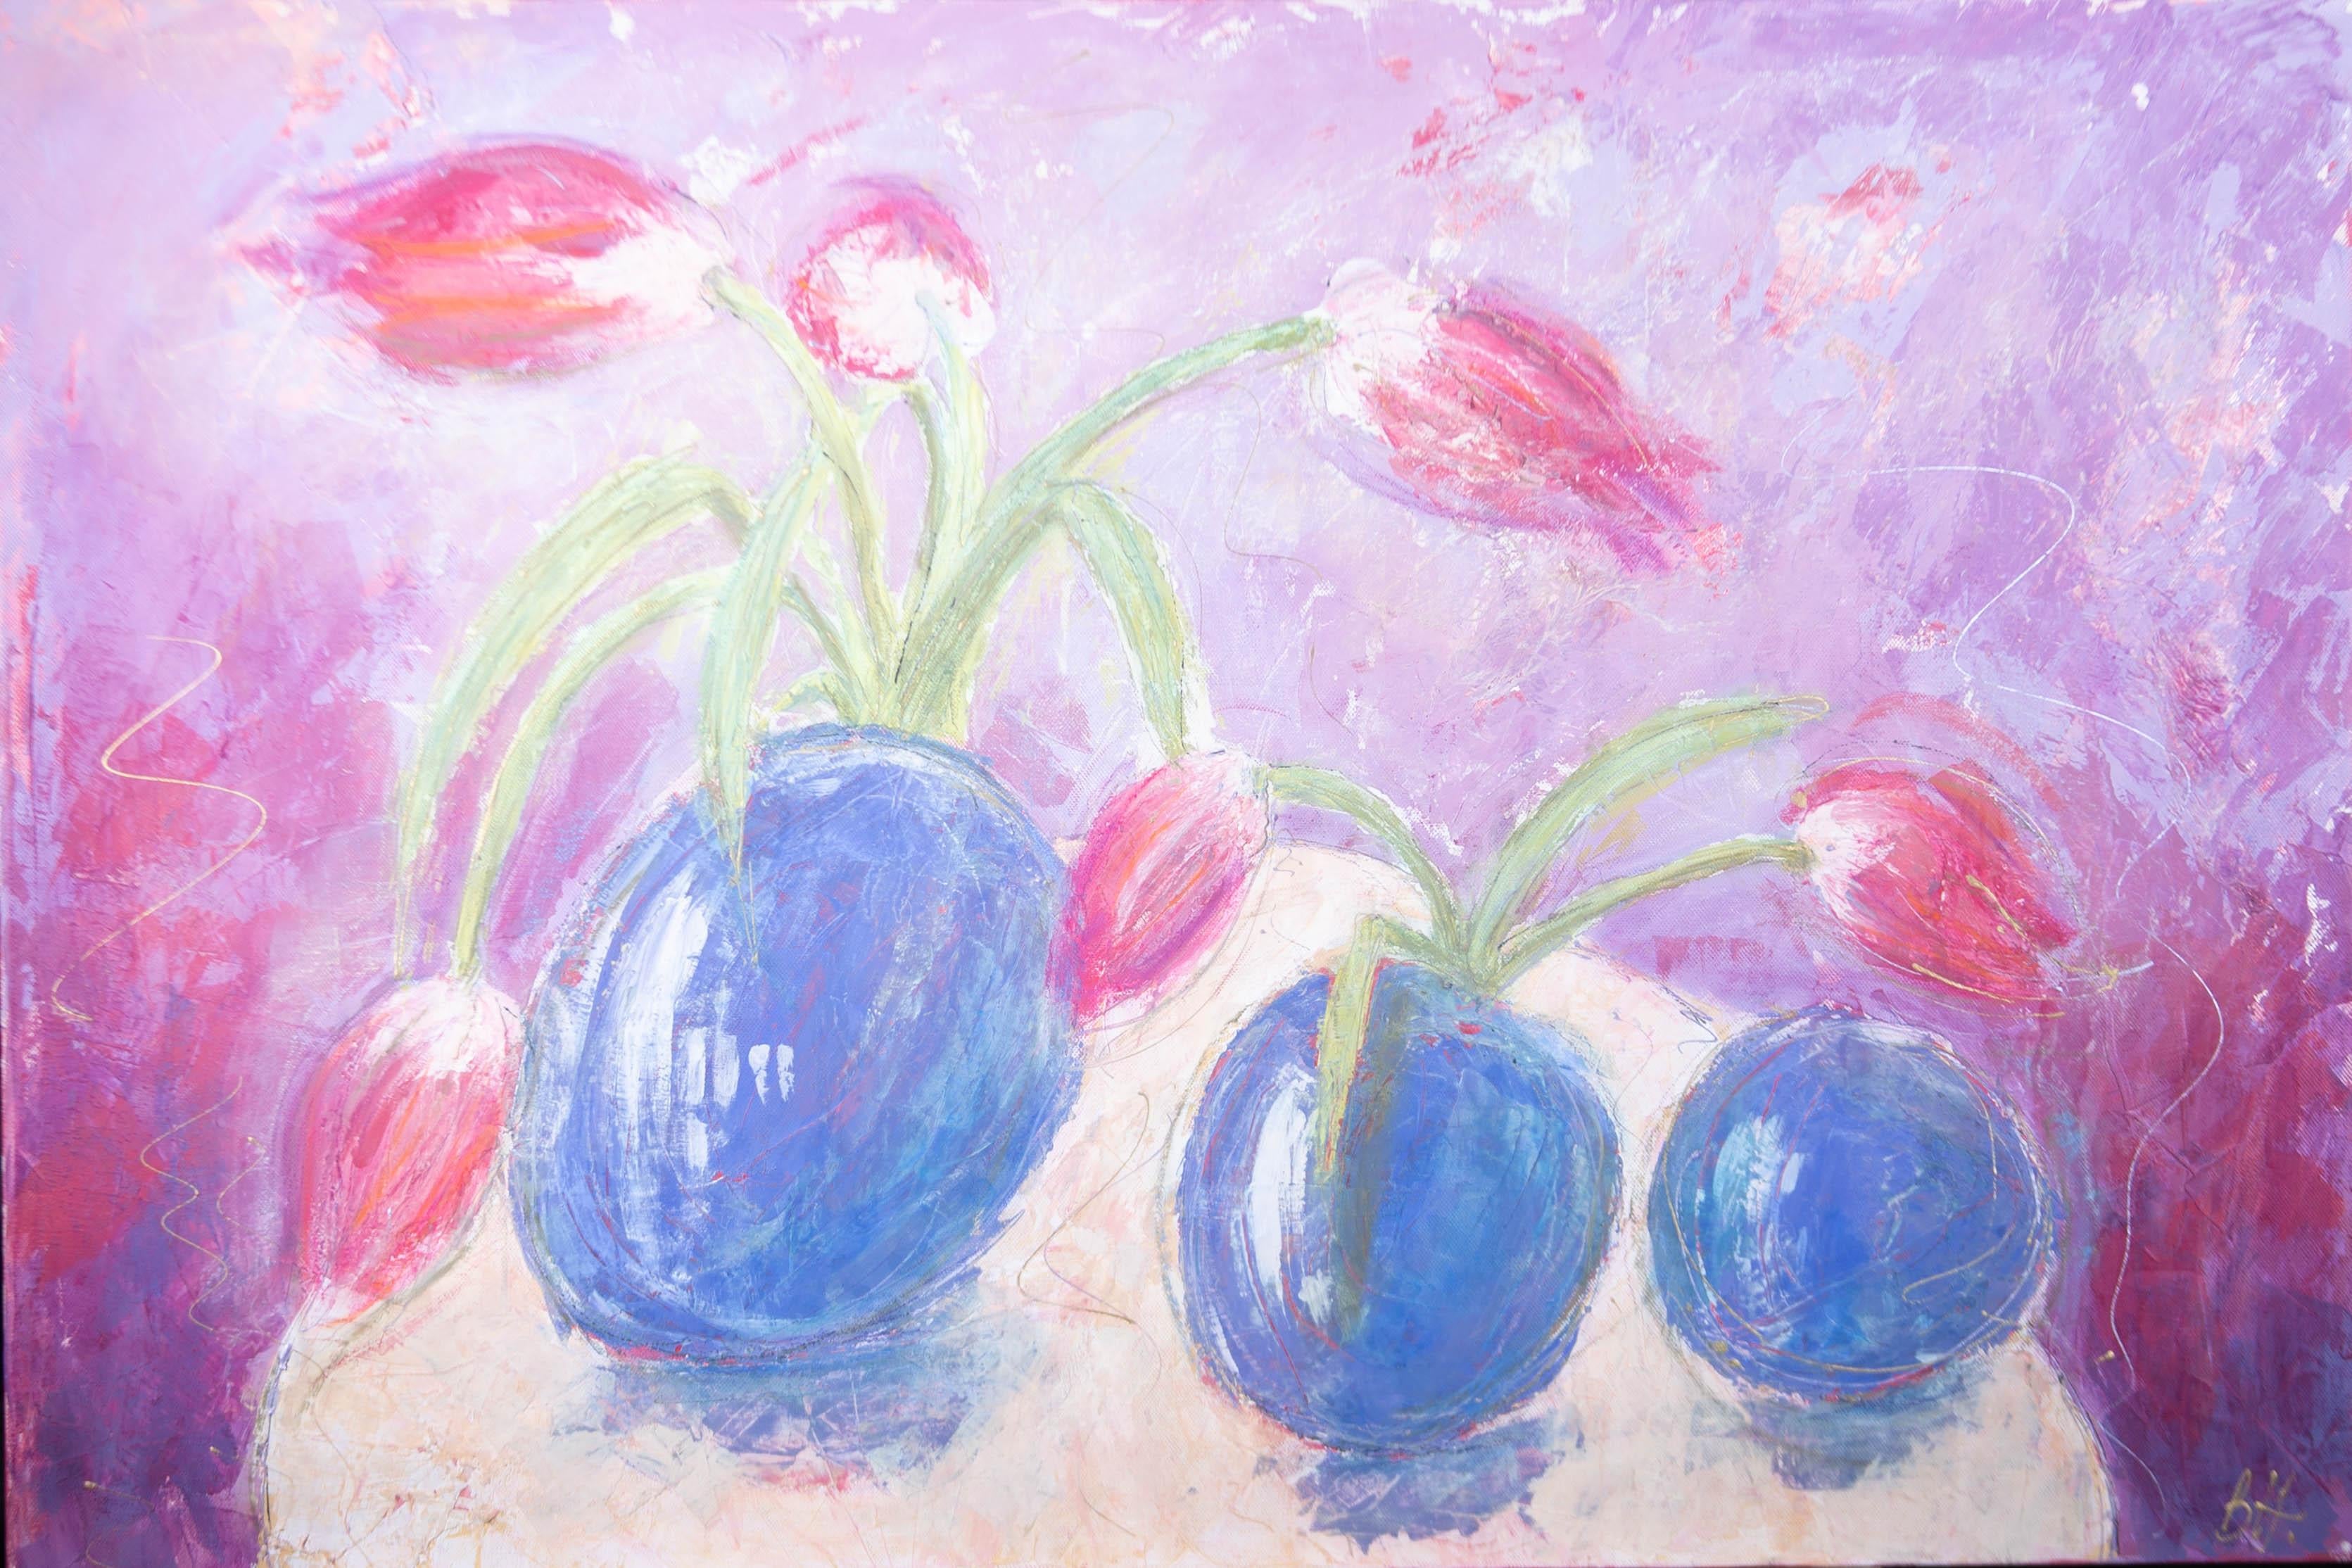 A dynamic and joyful mixed media piece using oil, acrylic and gold pen details over an impasto, textured ground. The still life shows pink tulips in three blue vases on a colorful background. The artist has initialed to the lower right corner and